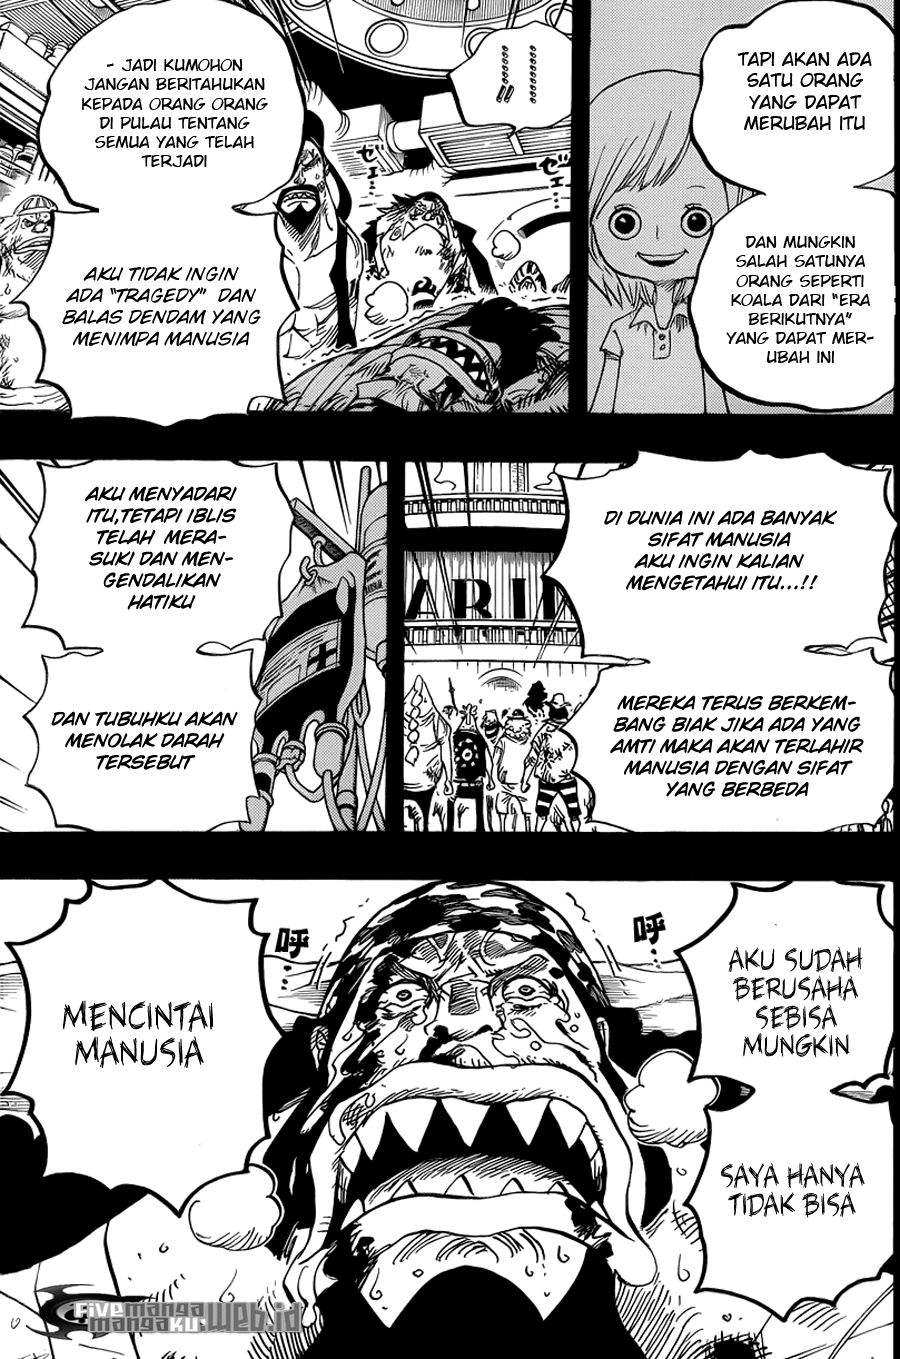 One Piece Chapter 623 – Si Bajak Laut Fisher Tiger - 153